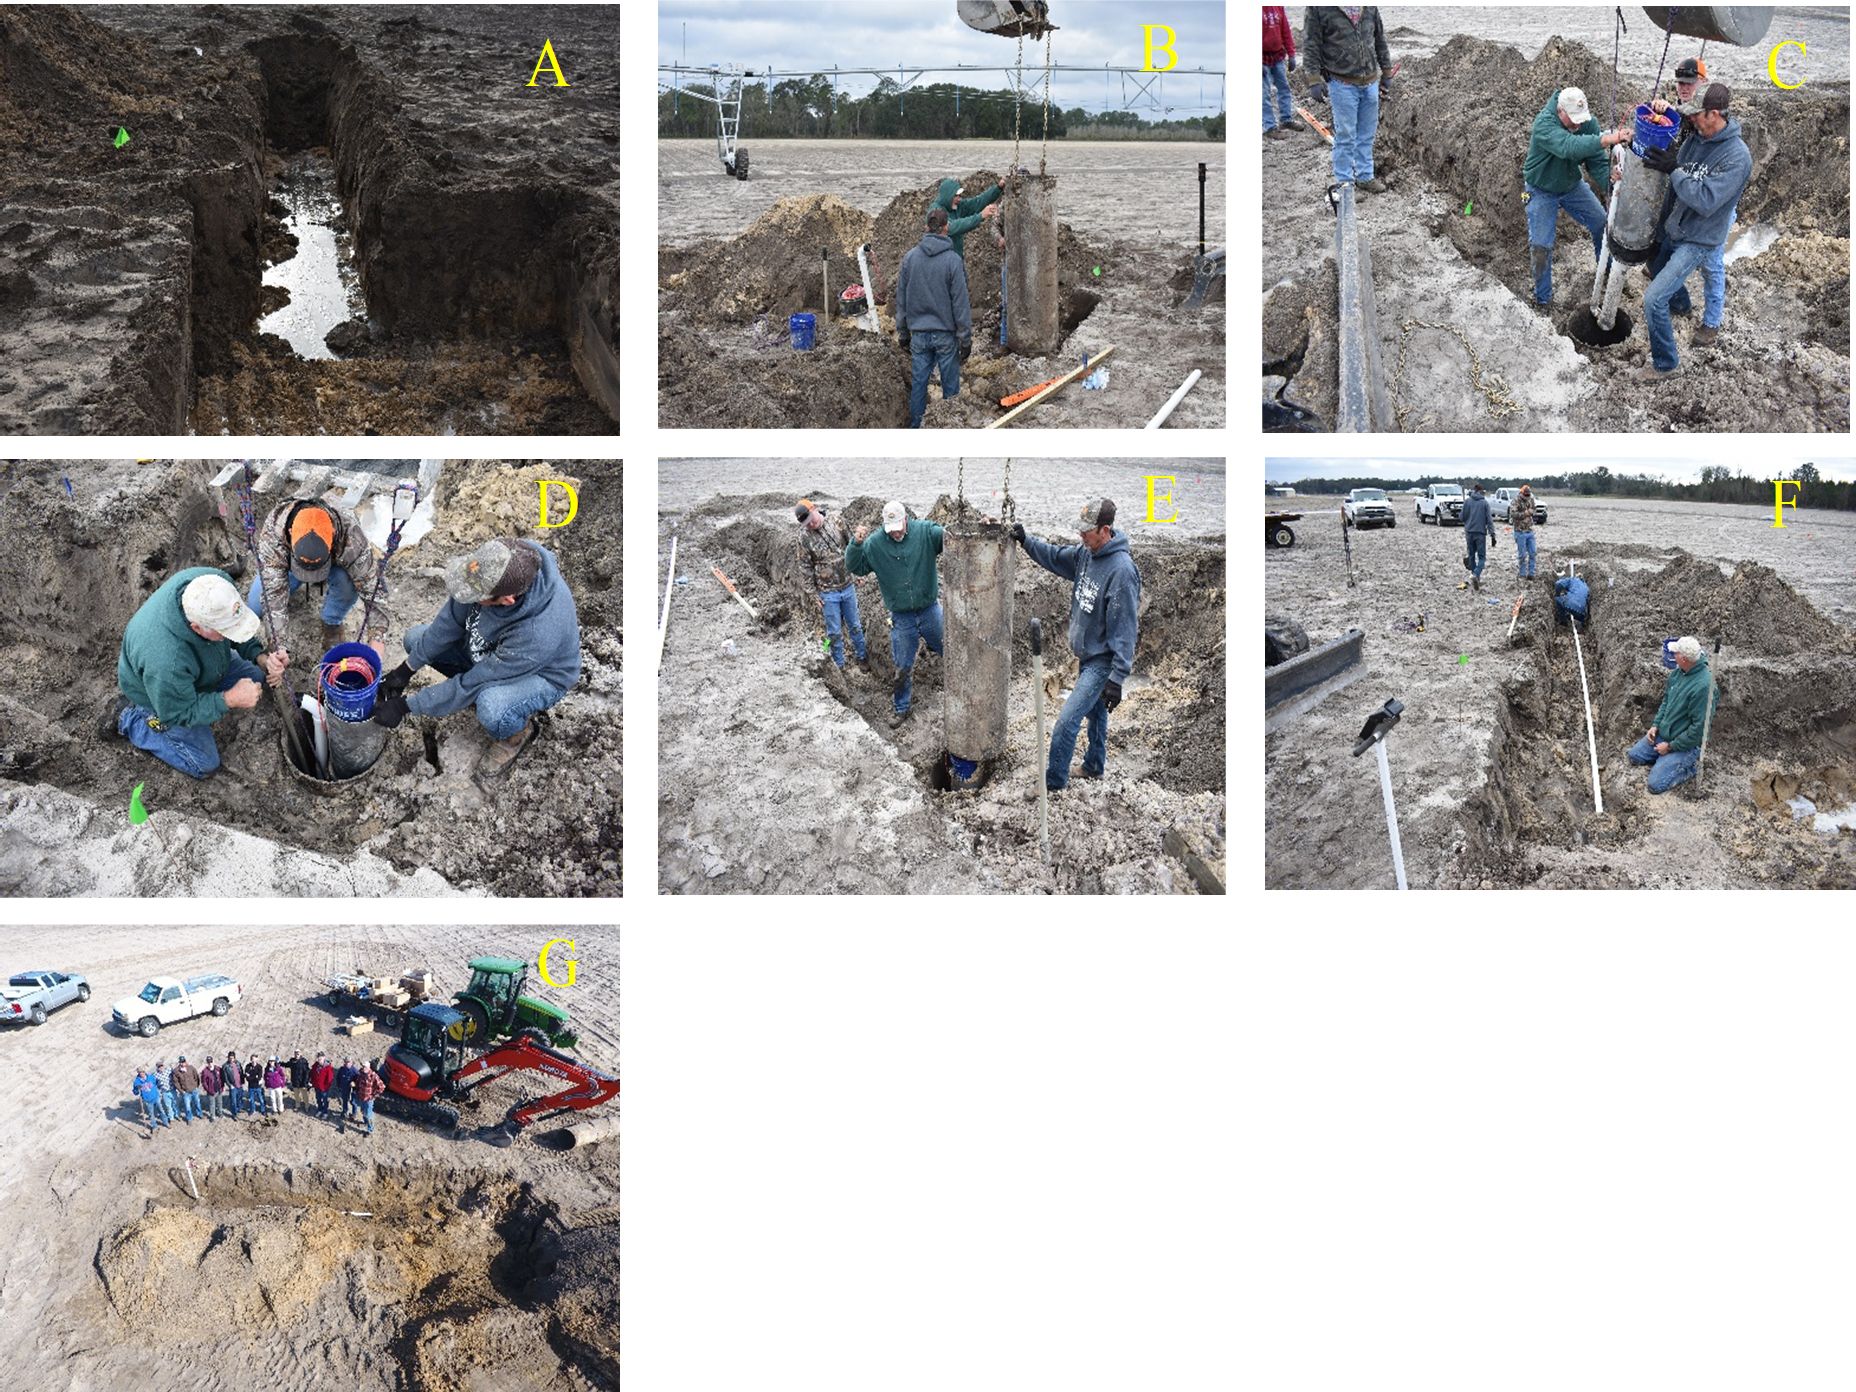 Installation of drainage lysimeter in UF/IFAS NFREC—Suwannee Valley, Live Oak, FL. A) Groundwater table visible. B) Inserting steel pipe to prevent soil from collapsing. C) Installing drainage lysimeter four feet below the soil surface. D) Drainage lysimeter within the steel pipe to keep the soil intact during lysimeter installation. E) Removal of the steel pipe after drainage lysimeter installation. F) Installing the PVC access pipes with the sensor cable and the sampling tube already inserted. G) An aerial view of the drainage lysimeter installation. 